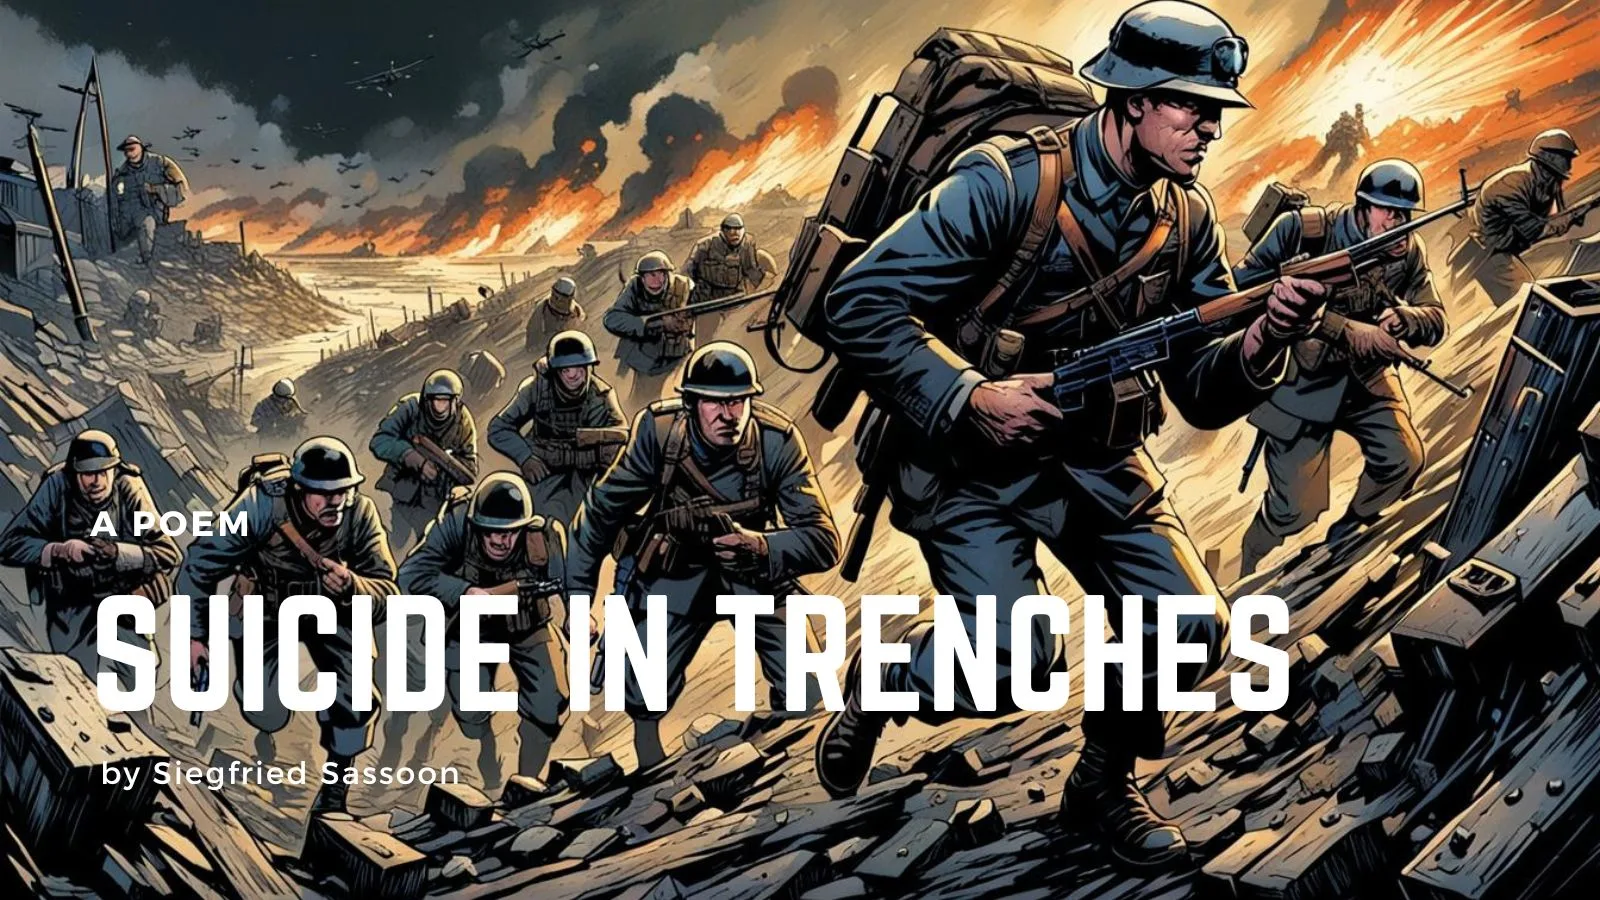 Suicide in Trenches by Siegfried Sassoon